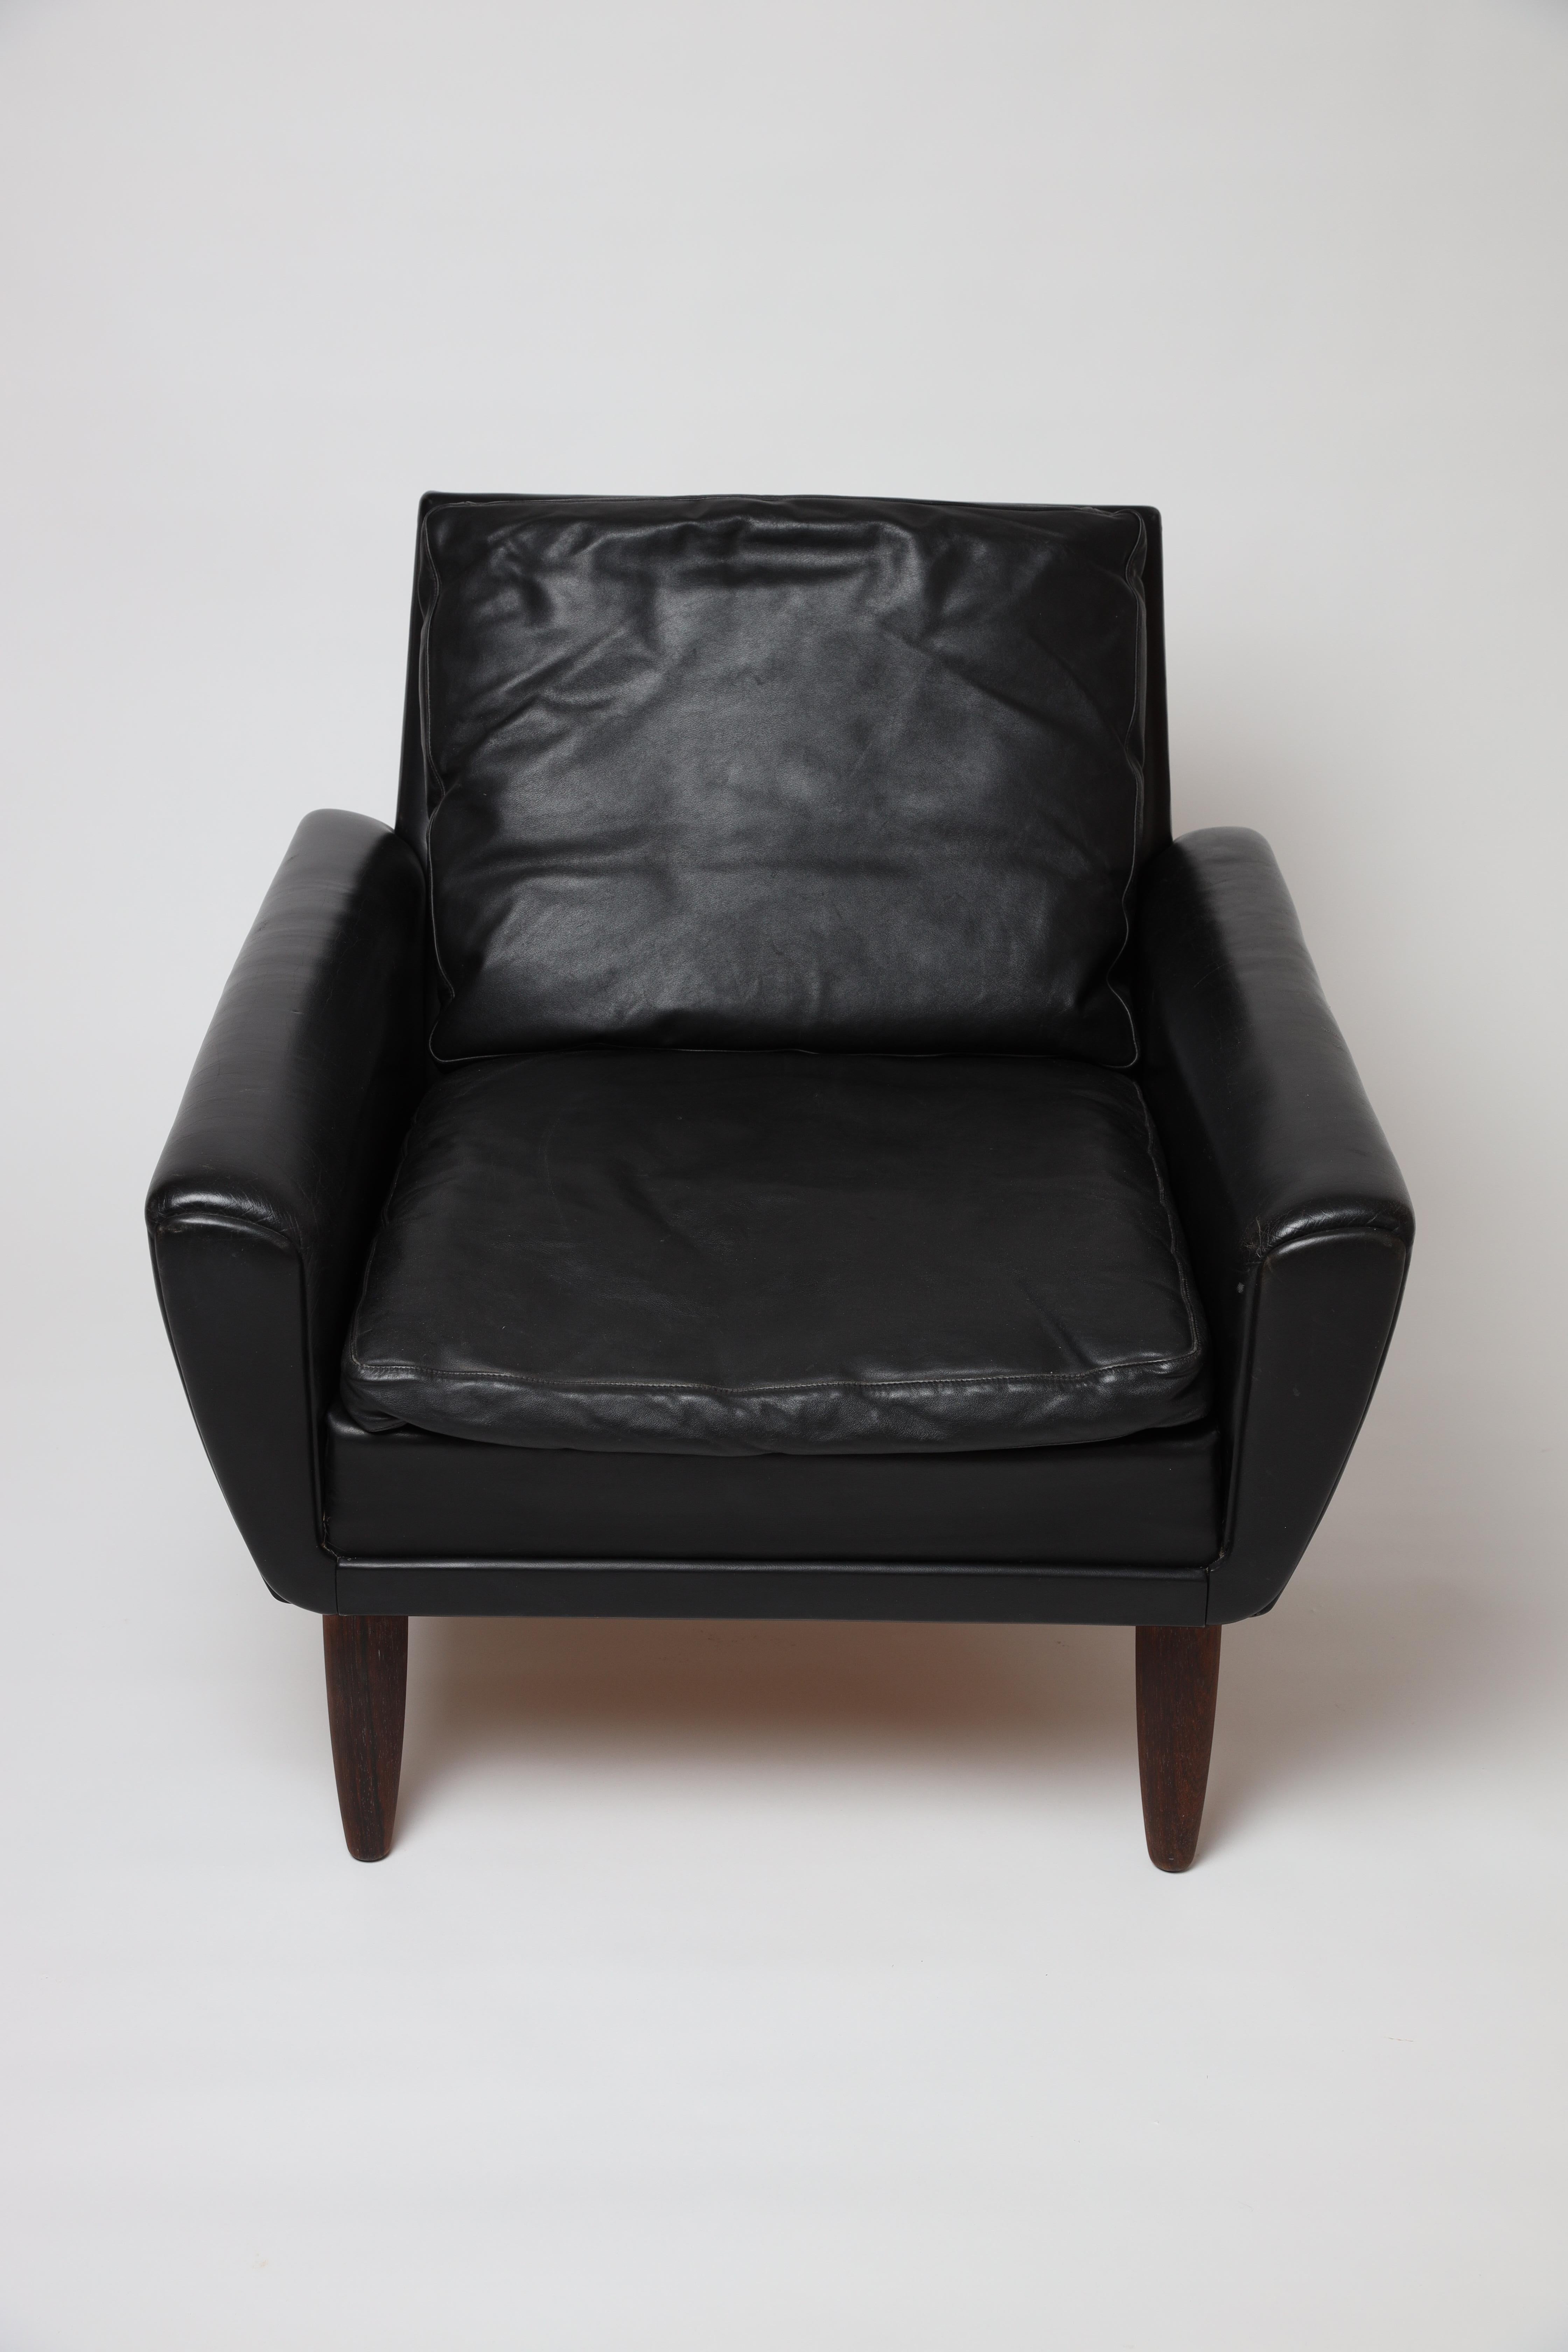 Scandinavian Modern Danish Modern Easy Chair by Georg Thams in Black Leather and Rosewood Legs, 1964